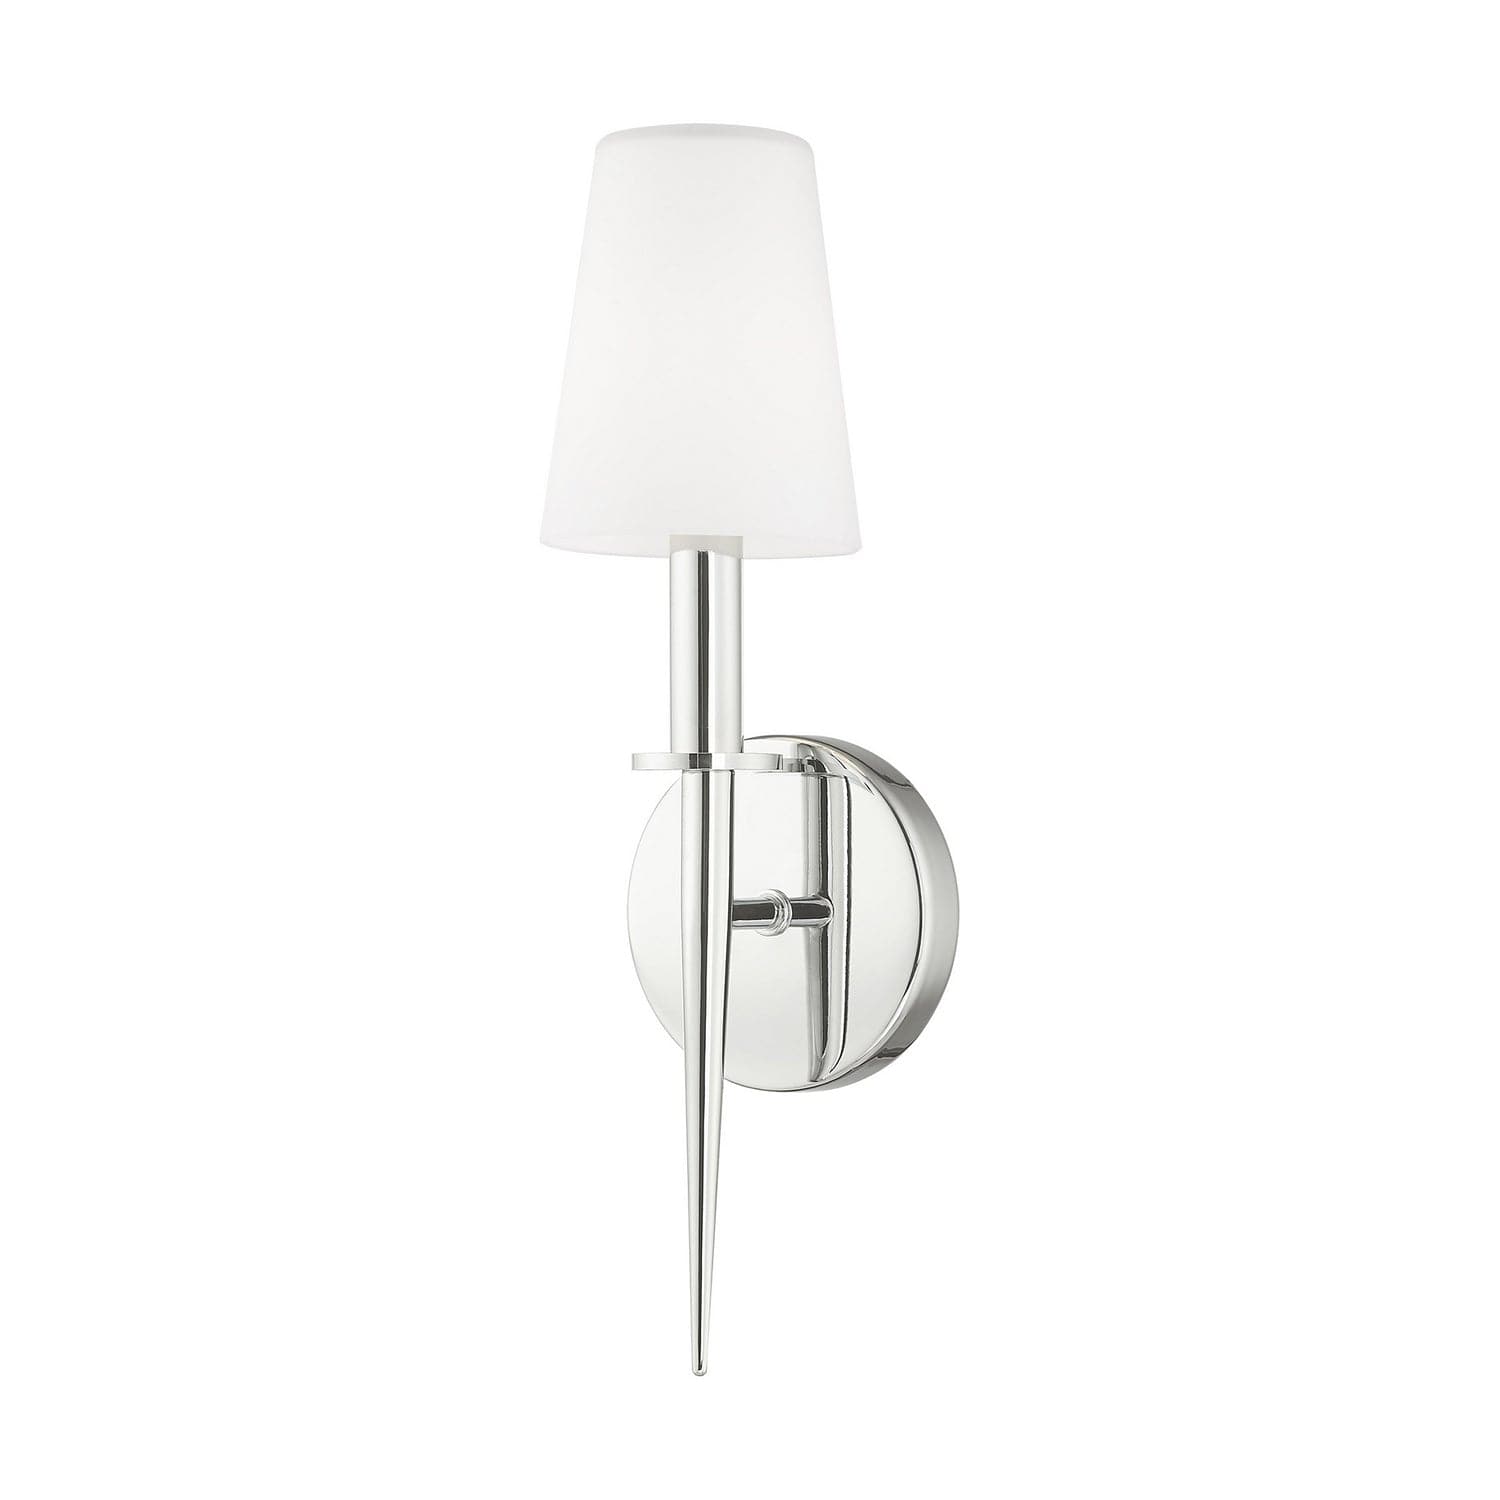 Livex Lighting - 41692-05 - One Light Wall Sconce - Witten - Polished Chrome